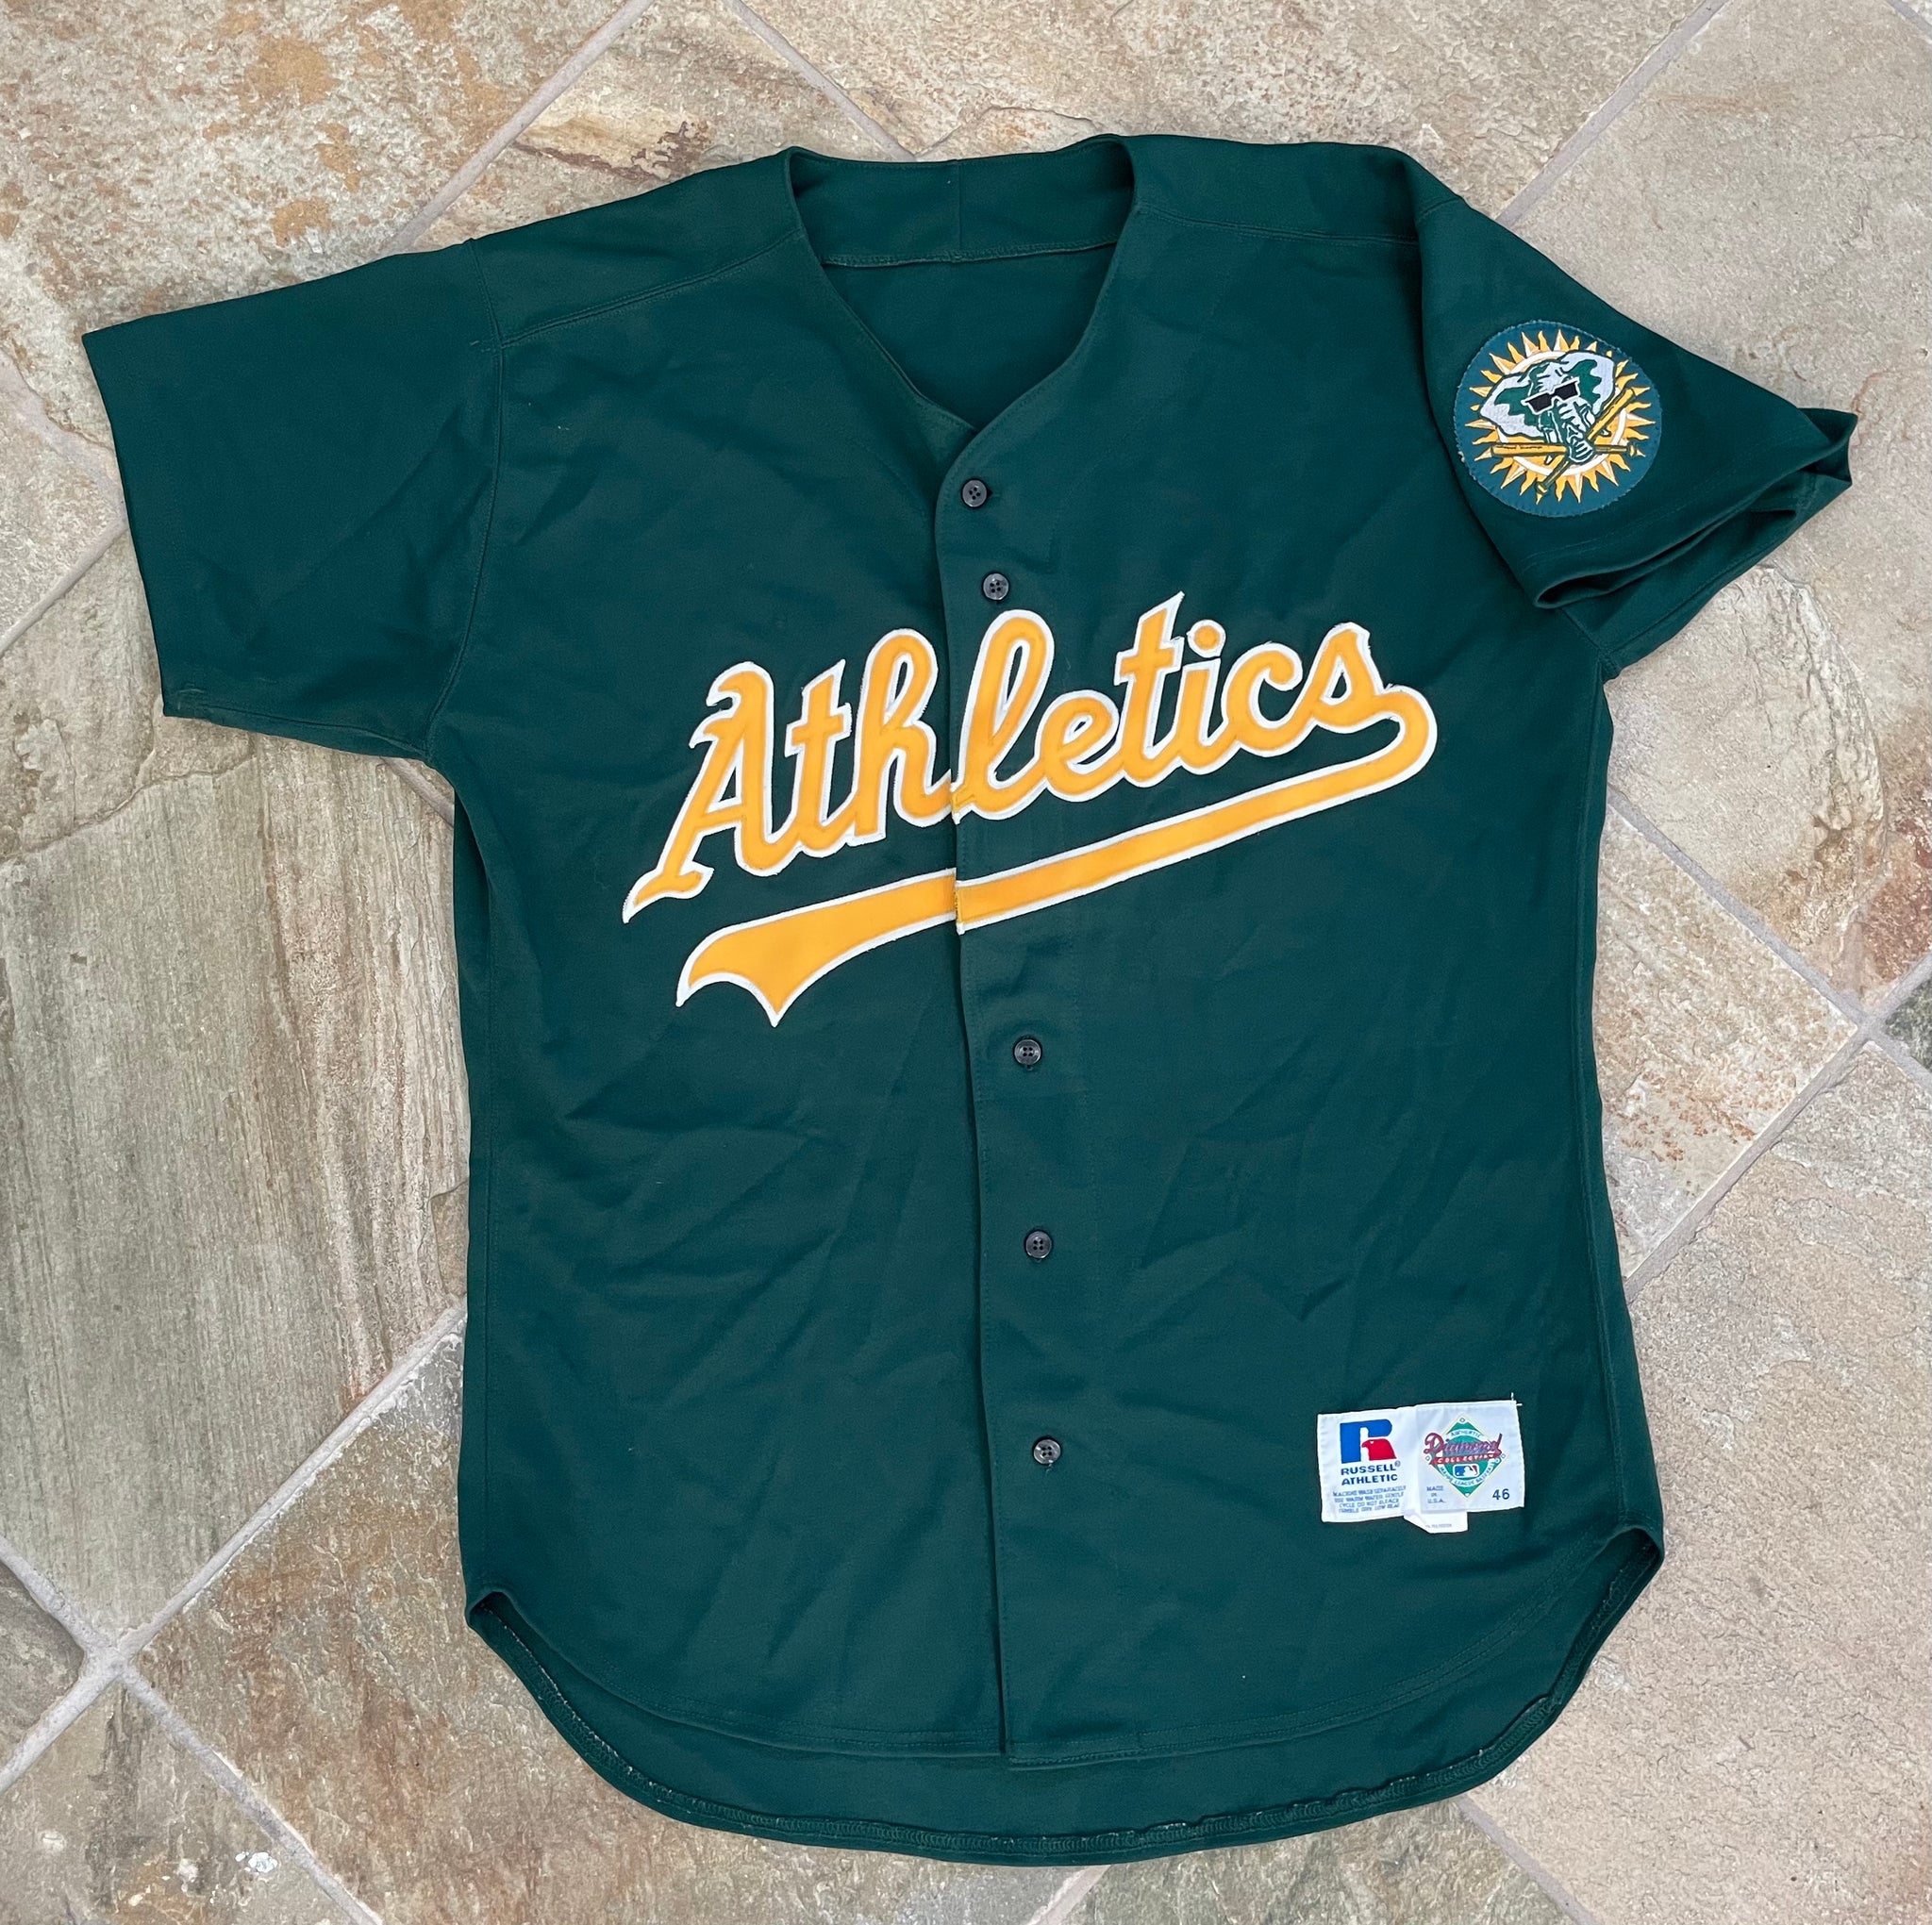 Russell Athletic - Oakland A’s Blank Jersey - Size 40